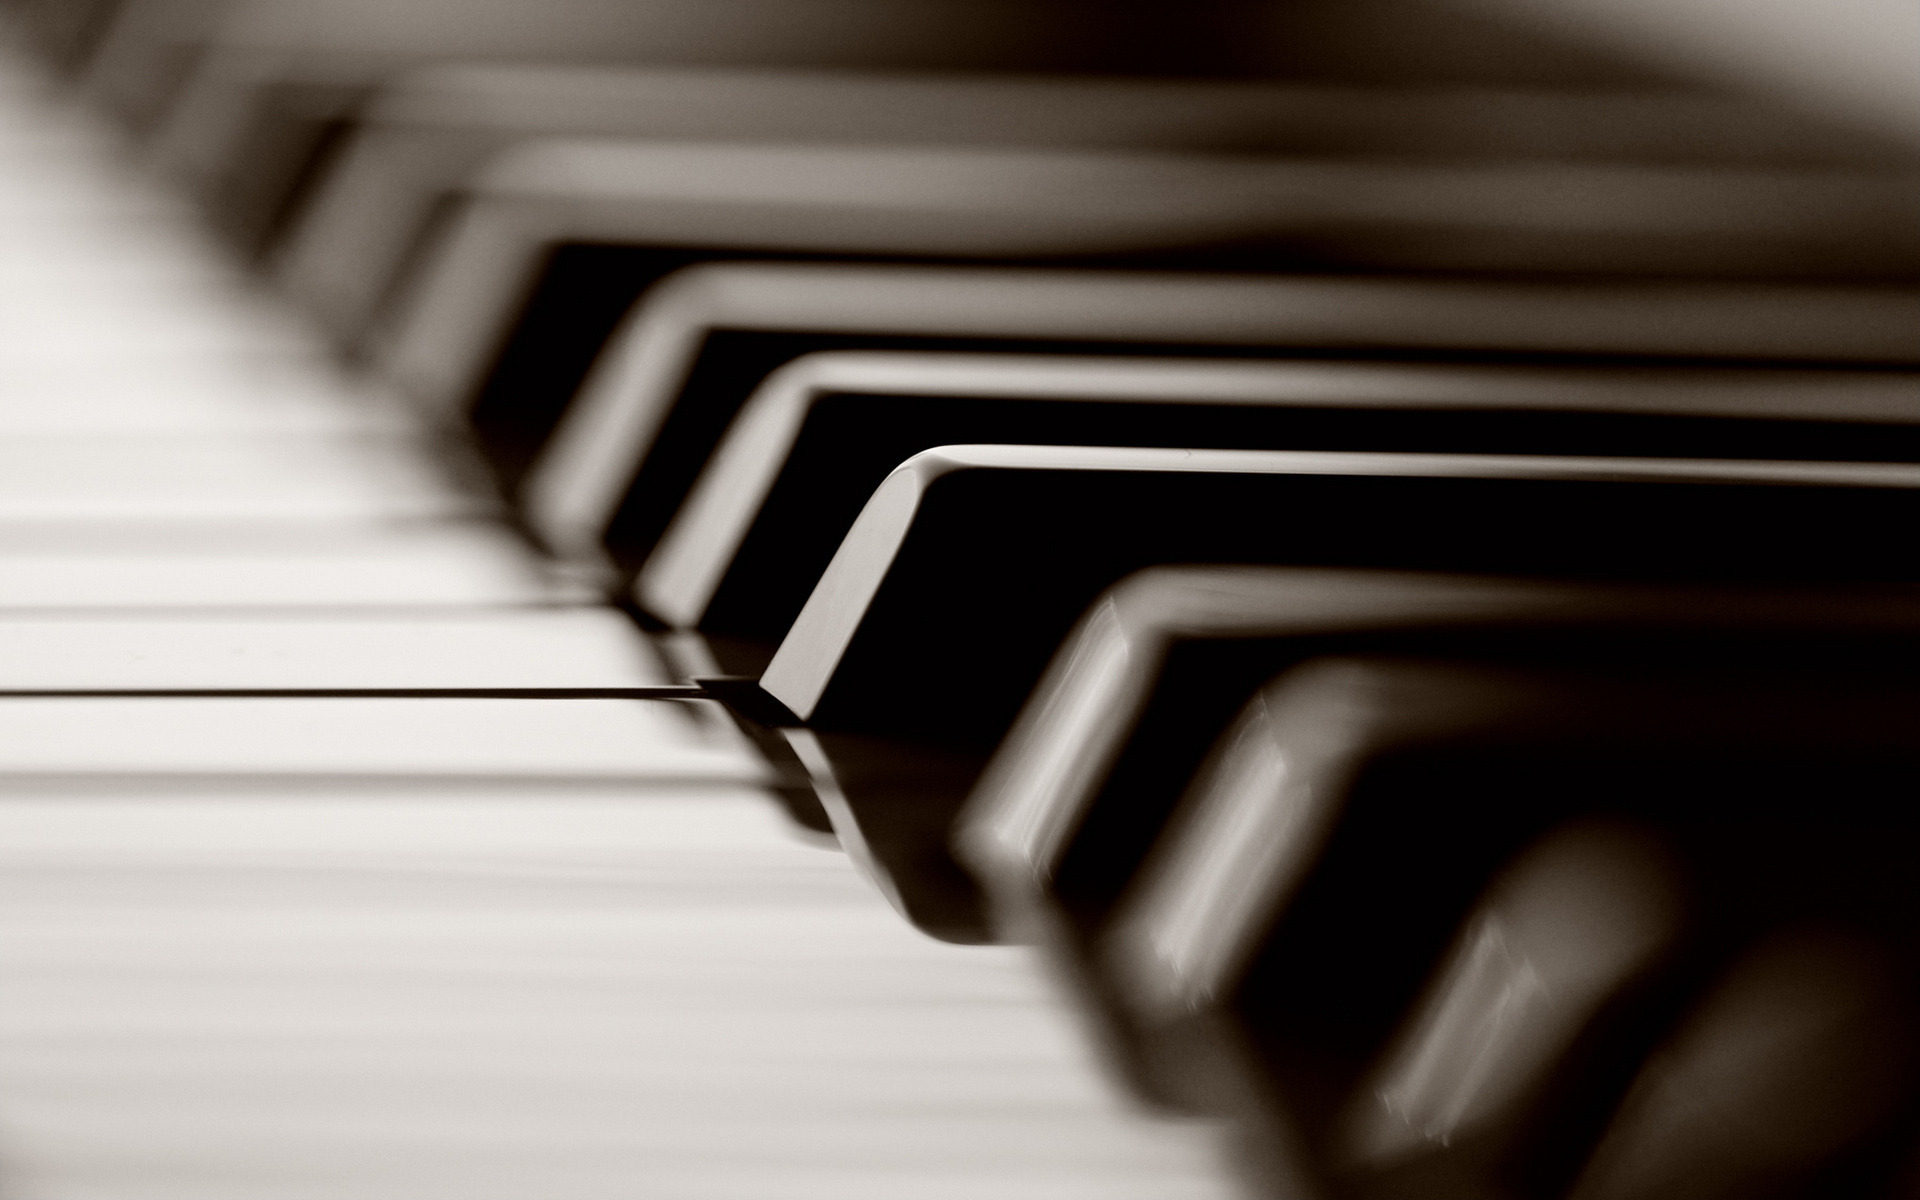 Piano Keys Wallpaper Hd Images amp Pictures   Becuo